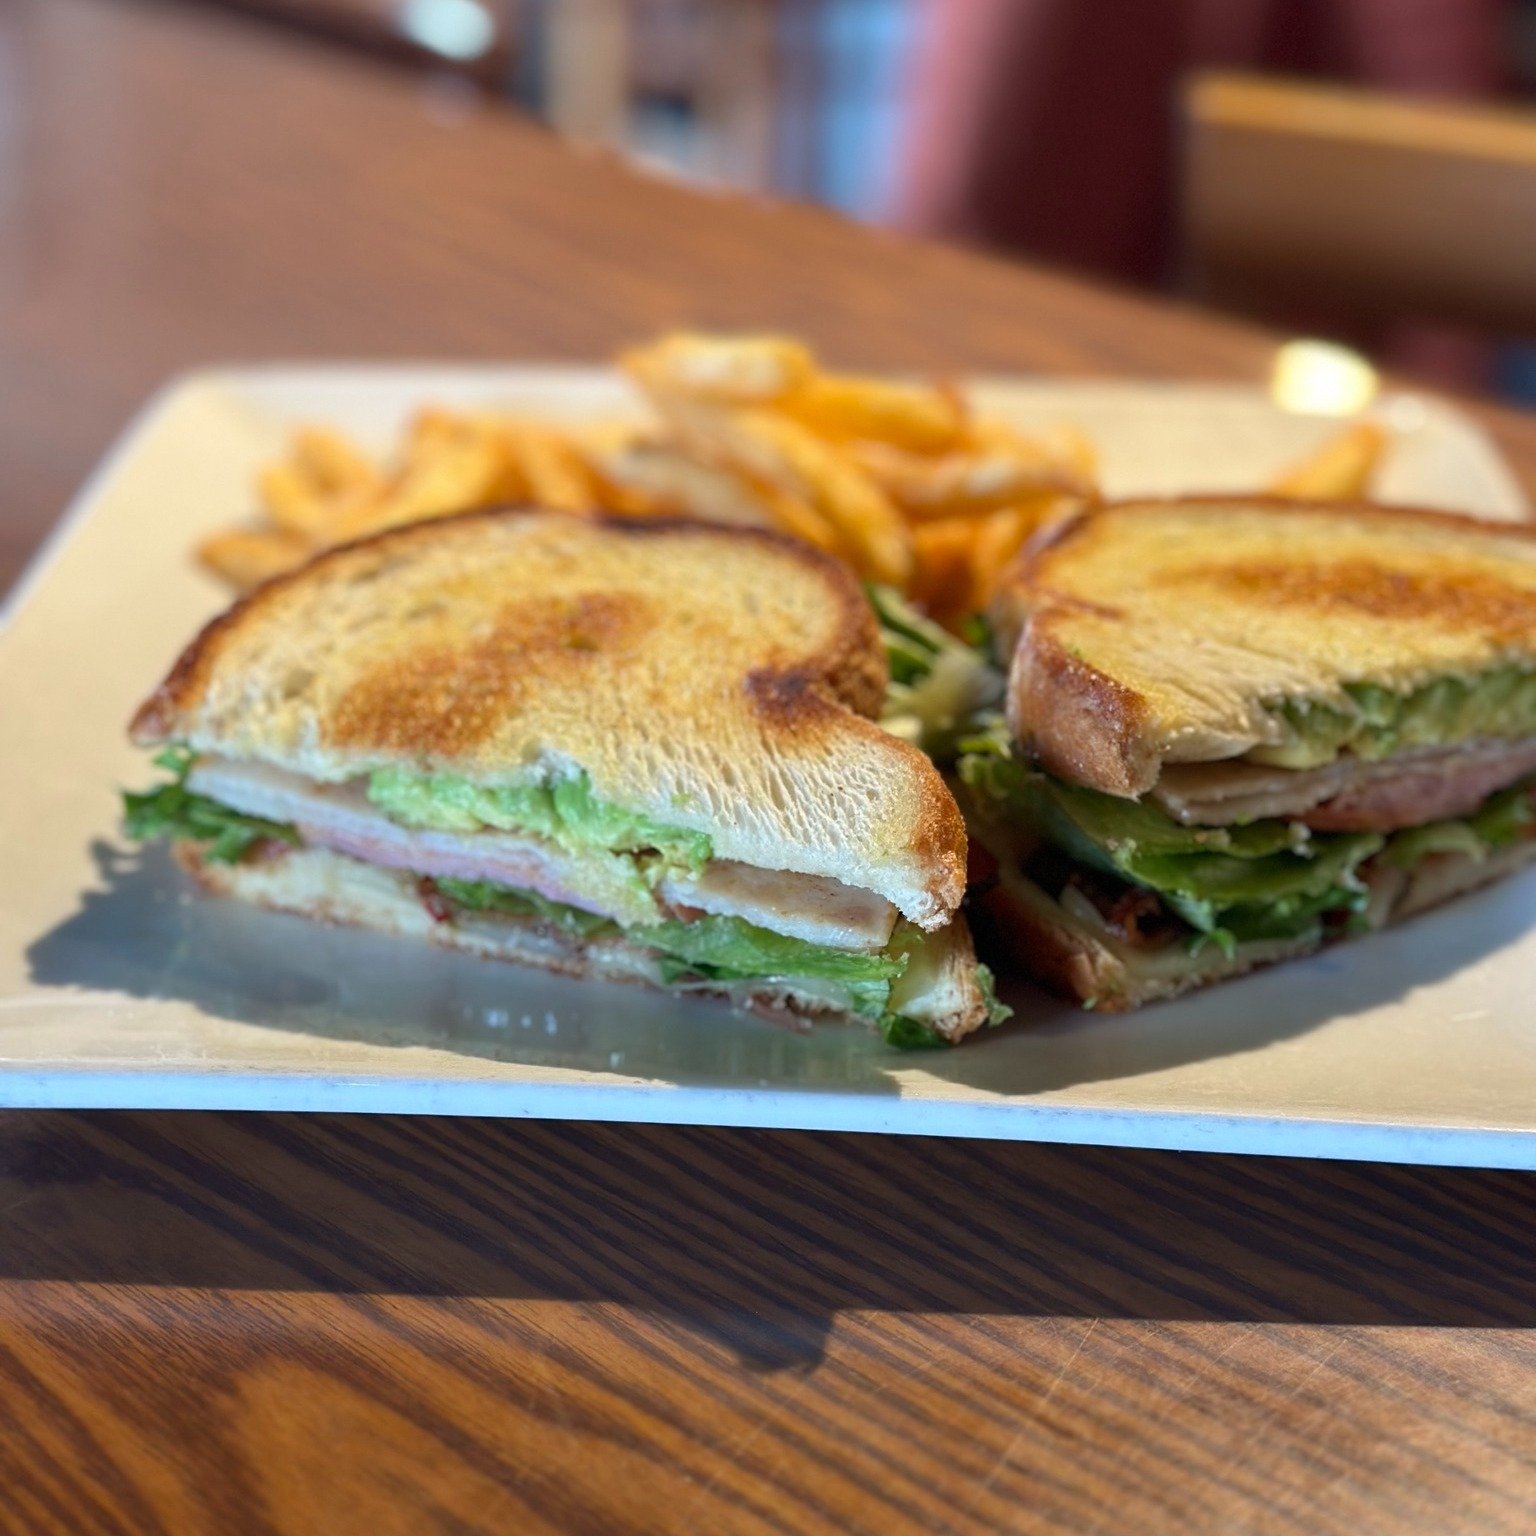 🥪 Meet your new lunch favorite: our Club Sandwich! Stacked with grilled bacon, Canadian bacon, turkey, and topped with gooey pepper jack cheese, nestled between toasted white bread with avocado, lettuce, and tomato.

#Elkodreez #explorenevada #brunc